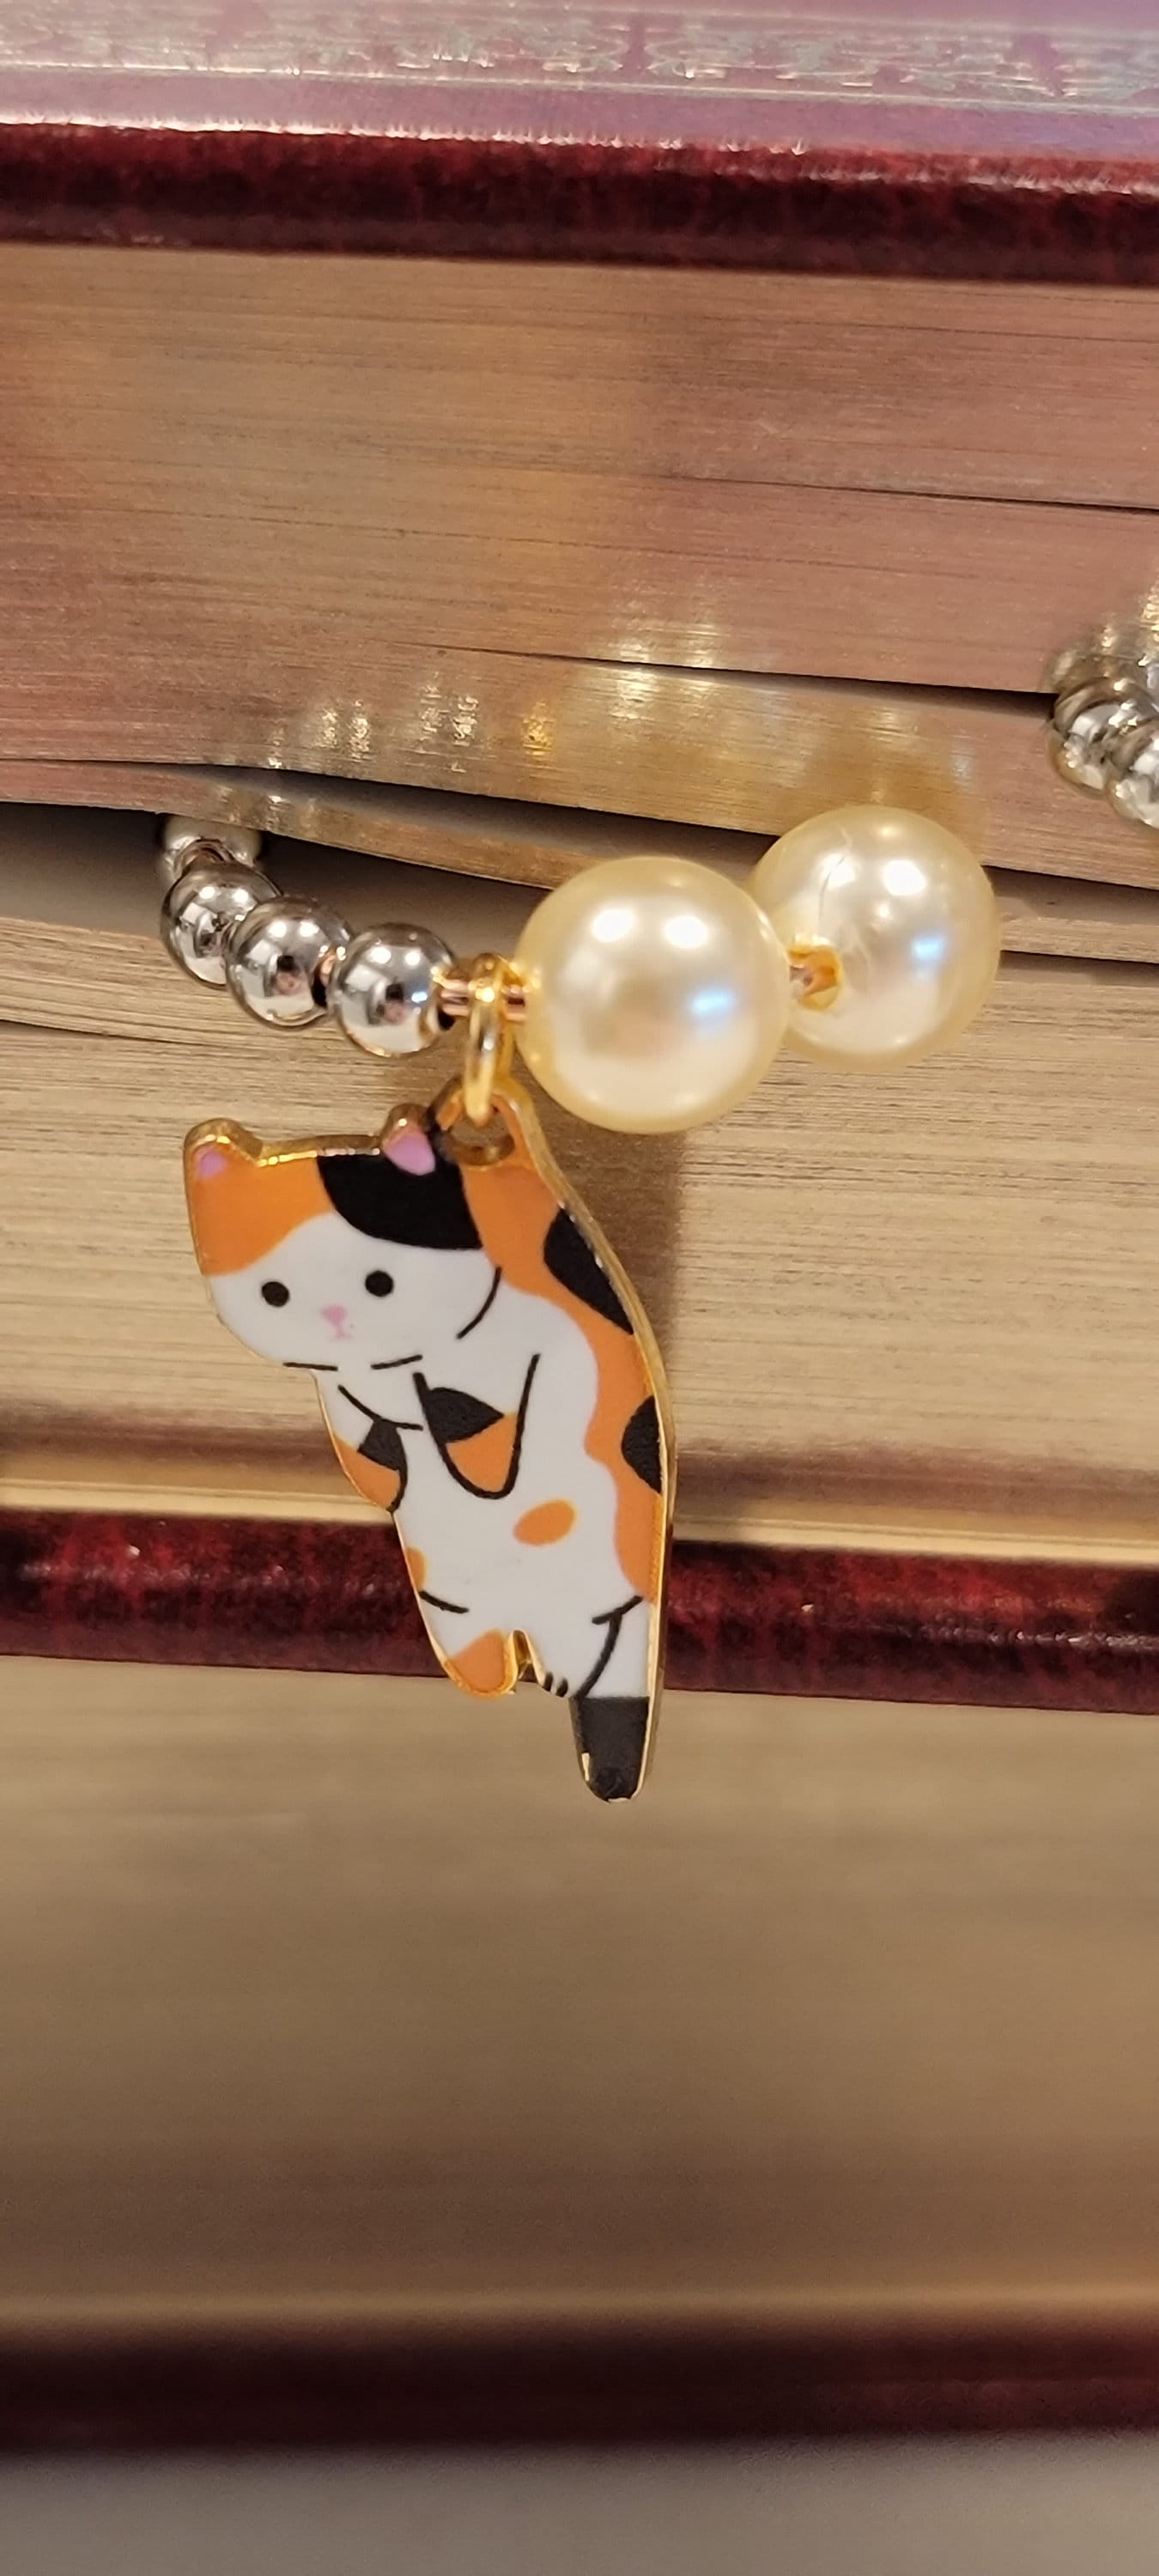 Set of gold "Hang in There" luxury kitten paperclip charms and bookmarks for planners, agendas, books & journals. - Thrice Exceptional